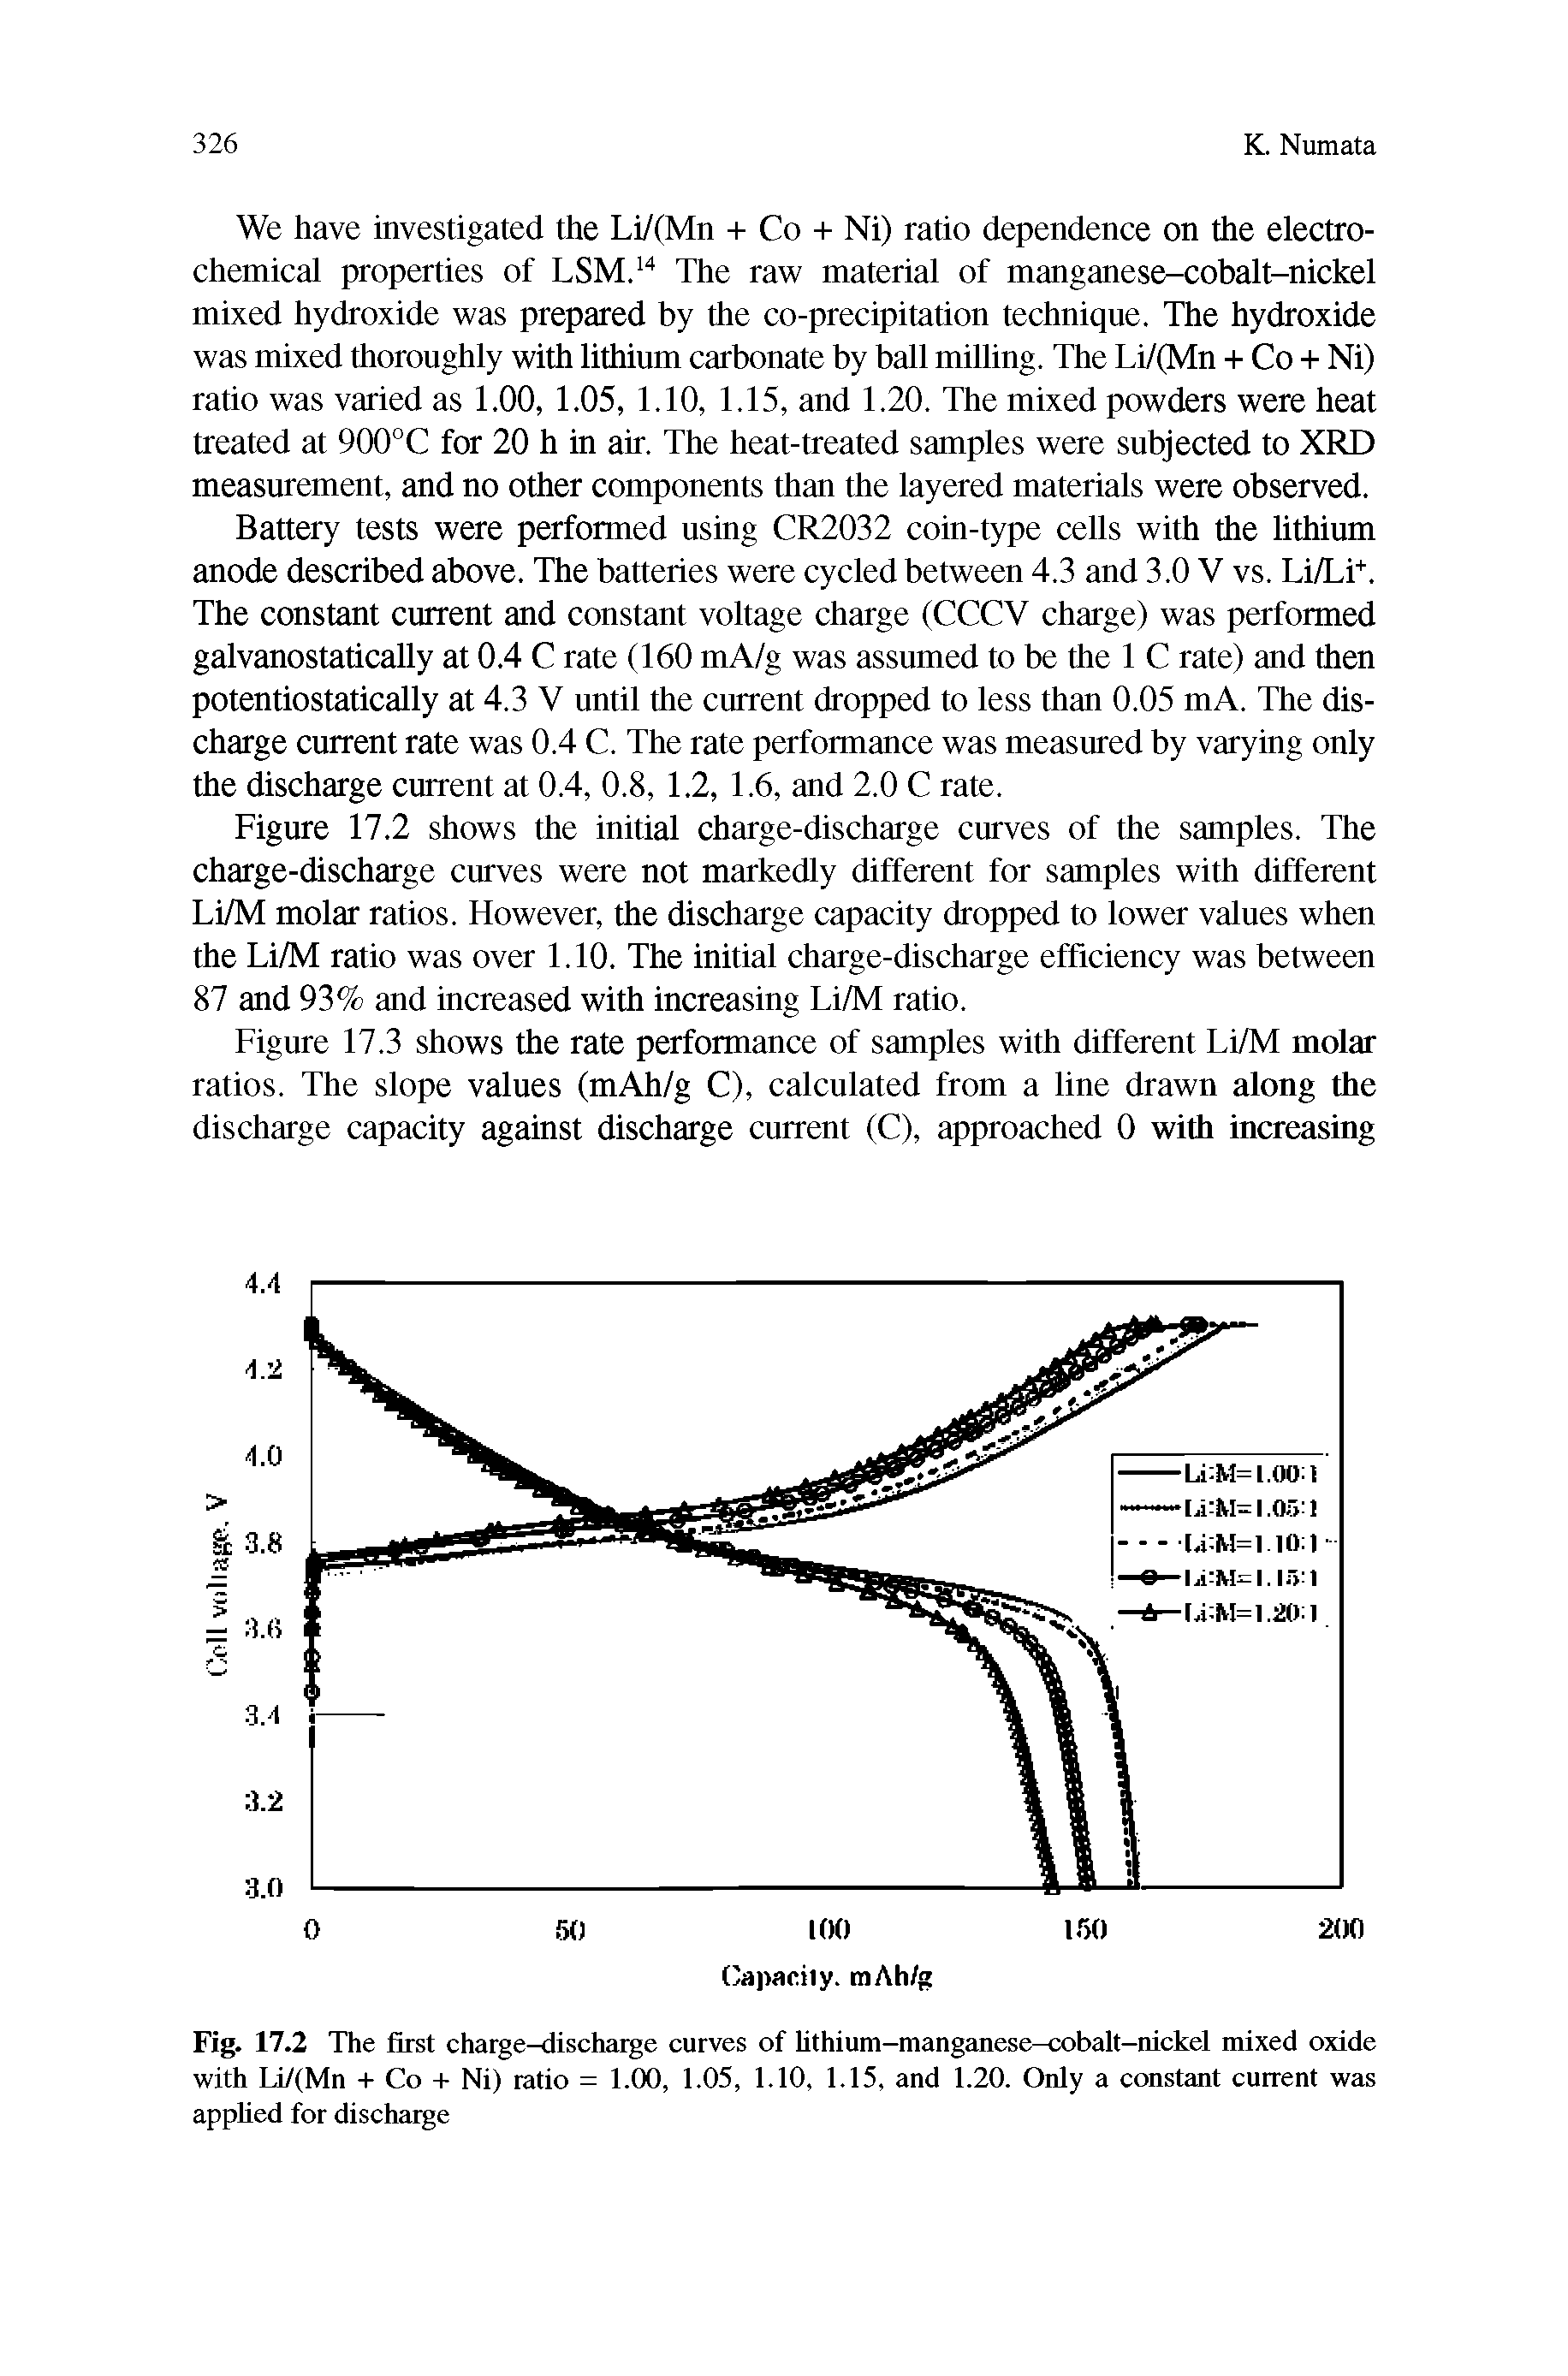 Fig. 17.2 The first chaige-dischaige curves of lithium-manganese-cobeilt-nickel mixed oxide with U/(Mn + Co + Ni) ratio = 1.00, 1.05, 1.10, 1.15, and 1.20. Only a constant current was apphed for discharge...